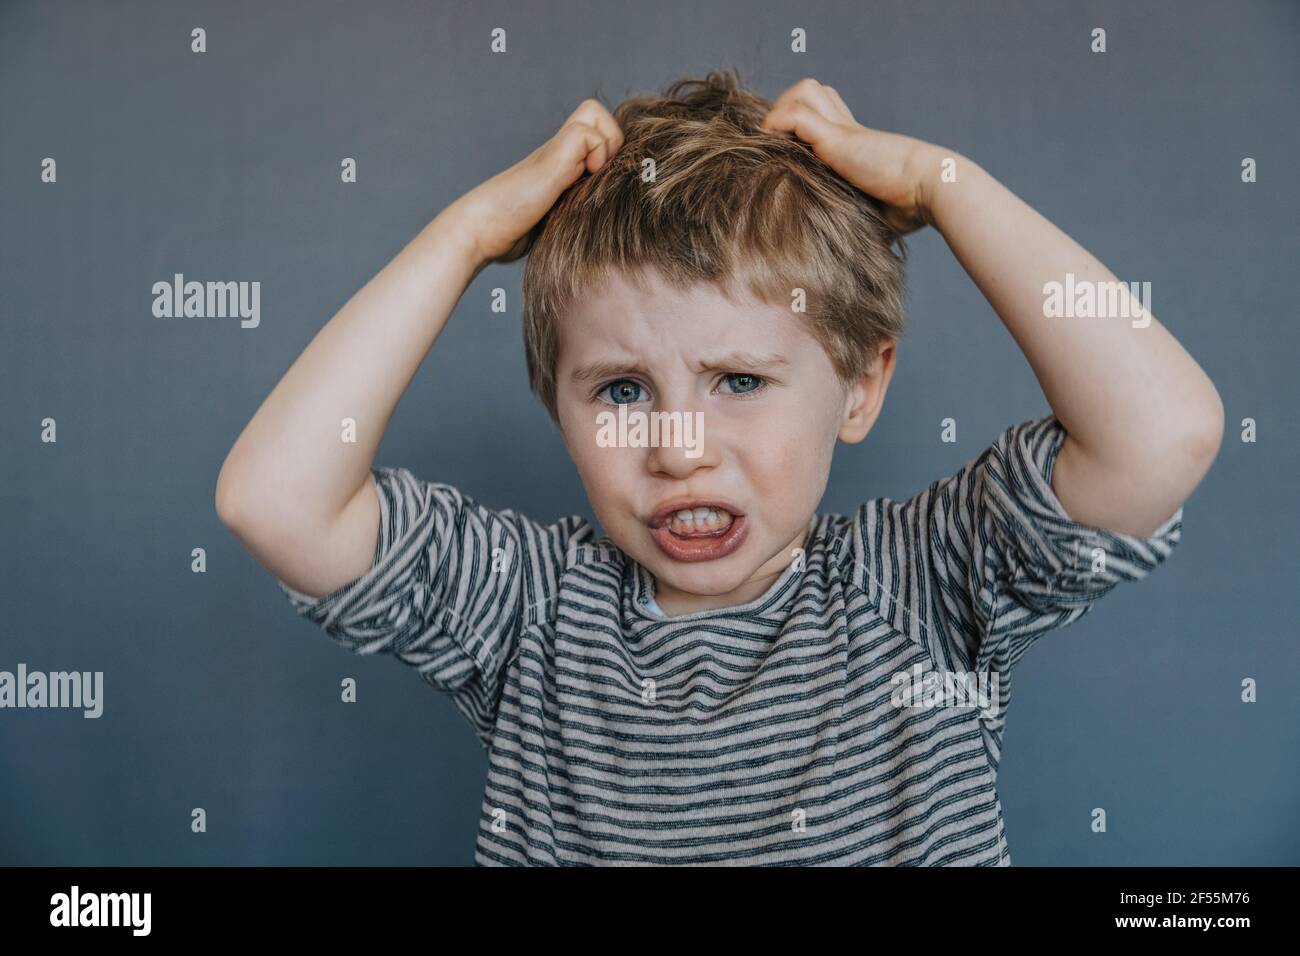 Frustrated boy scratching head against gray background Stock Photo